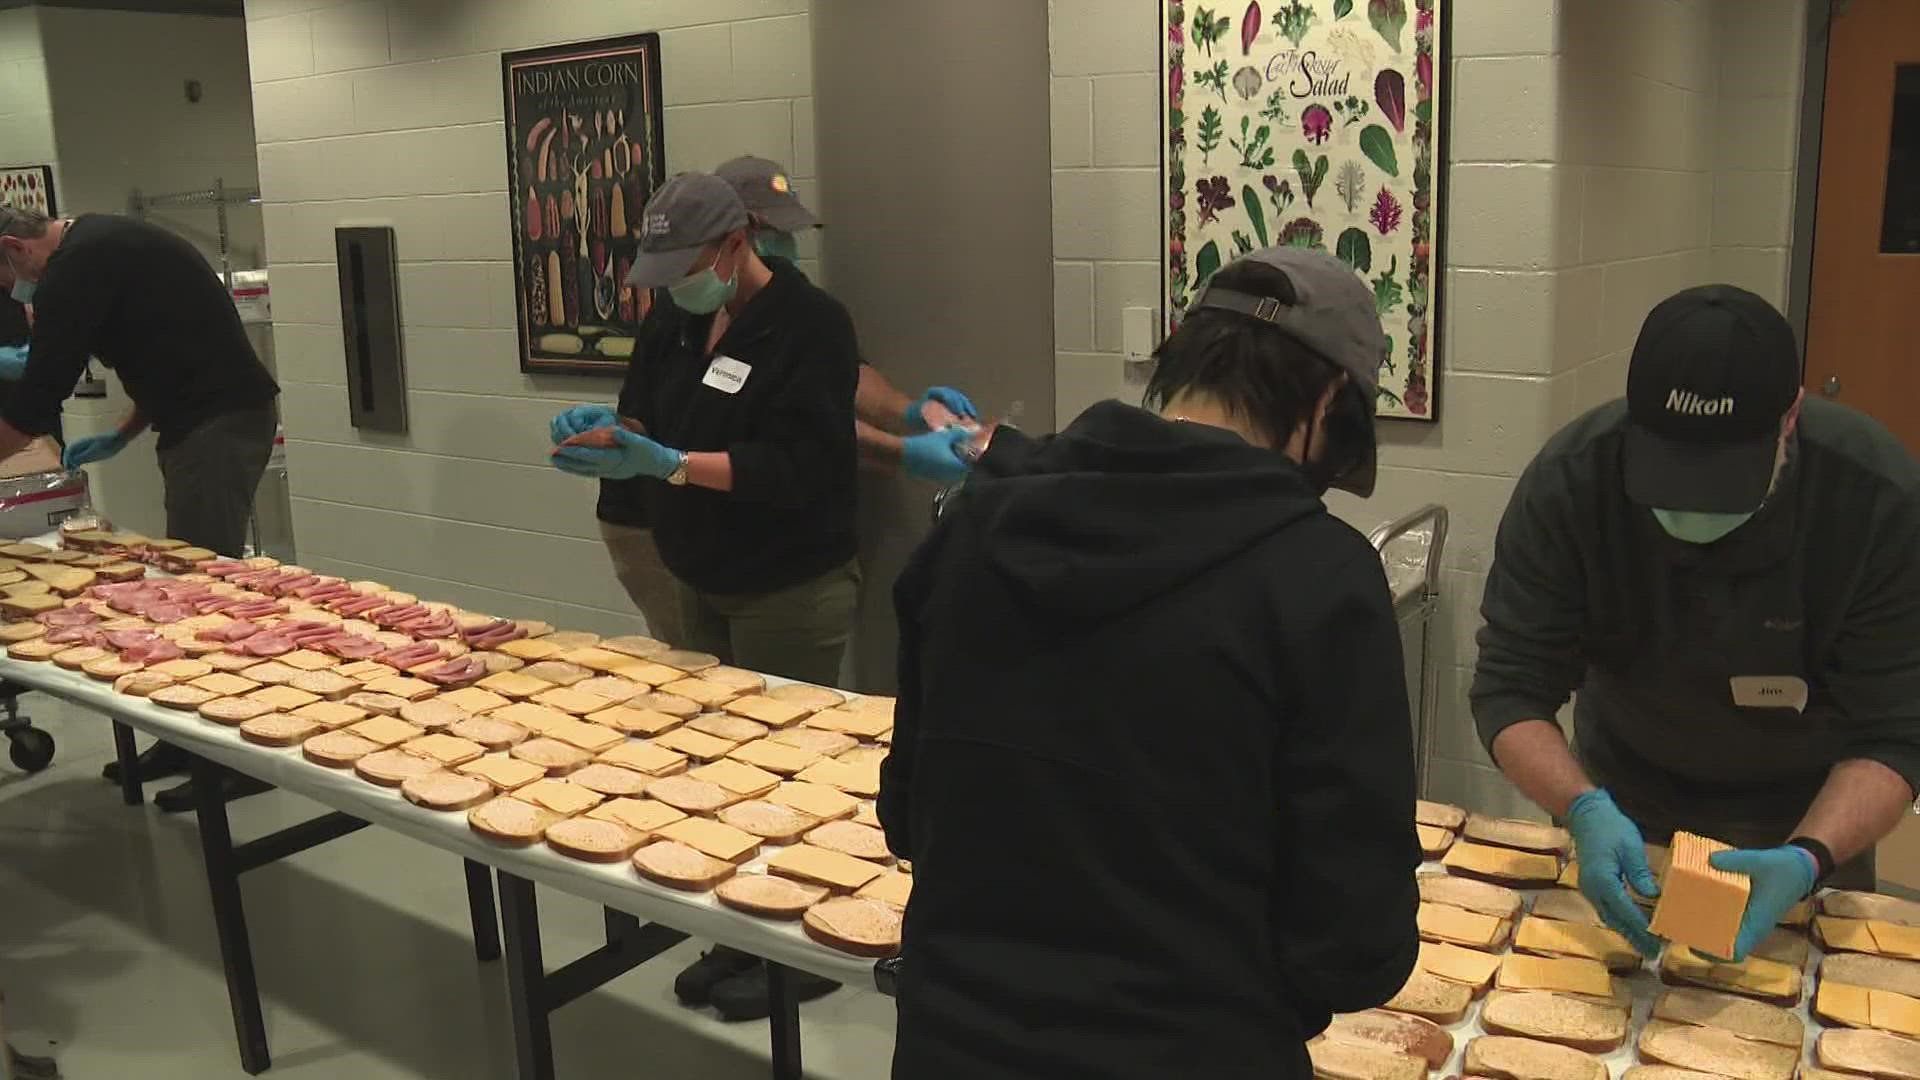 The training held Monday included volunteer management, sandwich-making, mass production and distribution logistics.